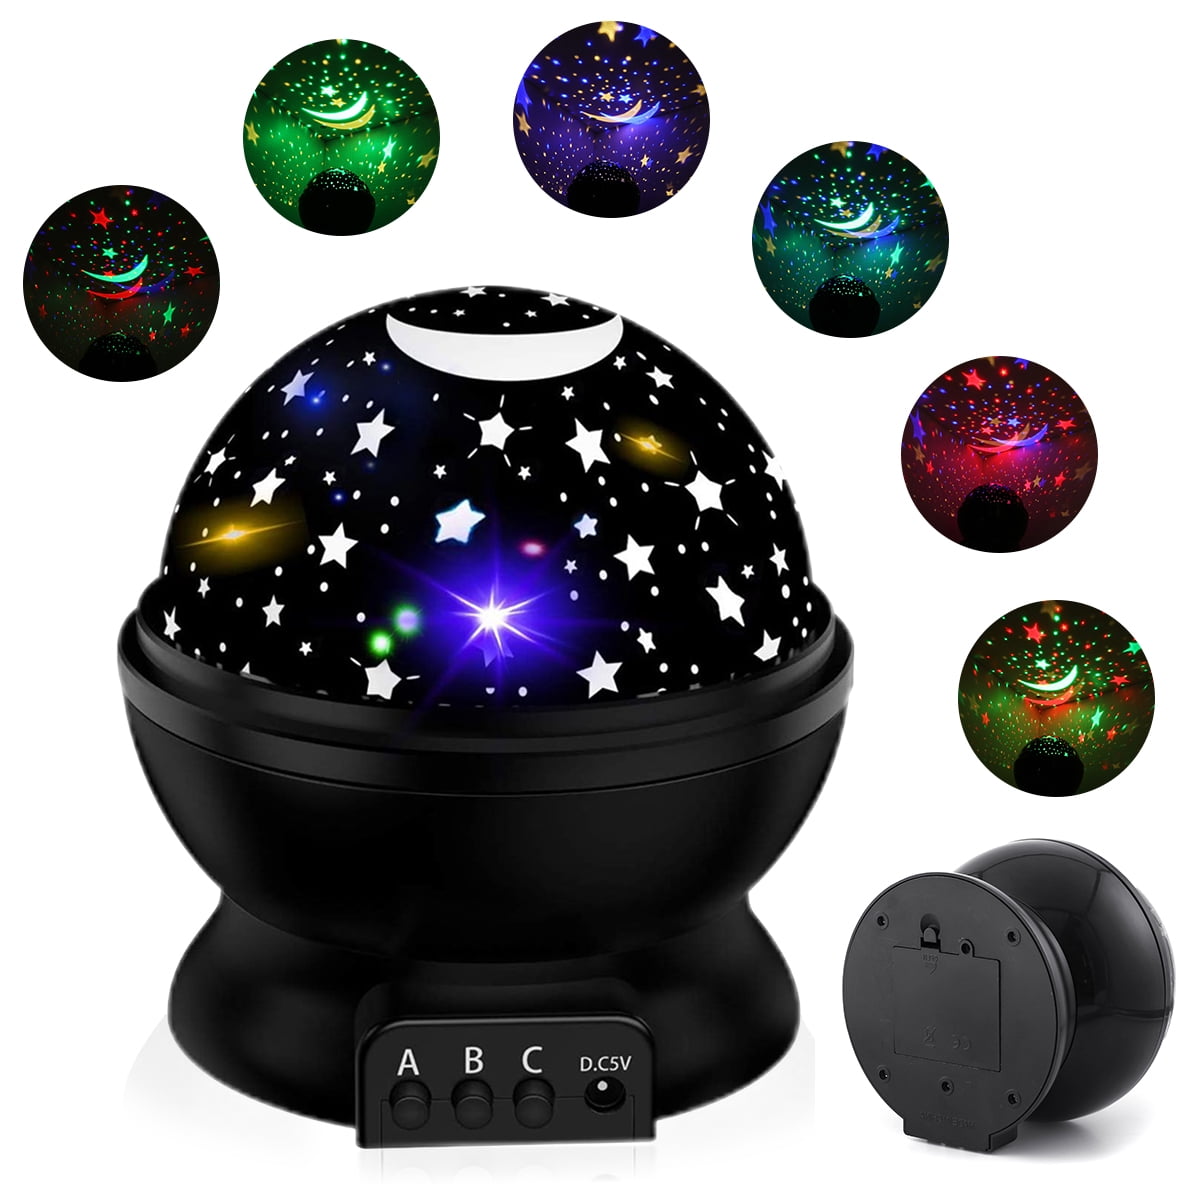 Details about   Starry Sky Night Light Projector Children Night Light Projector Kids Baby Toy 